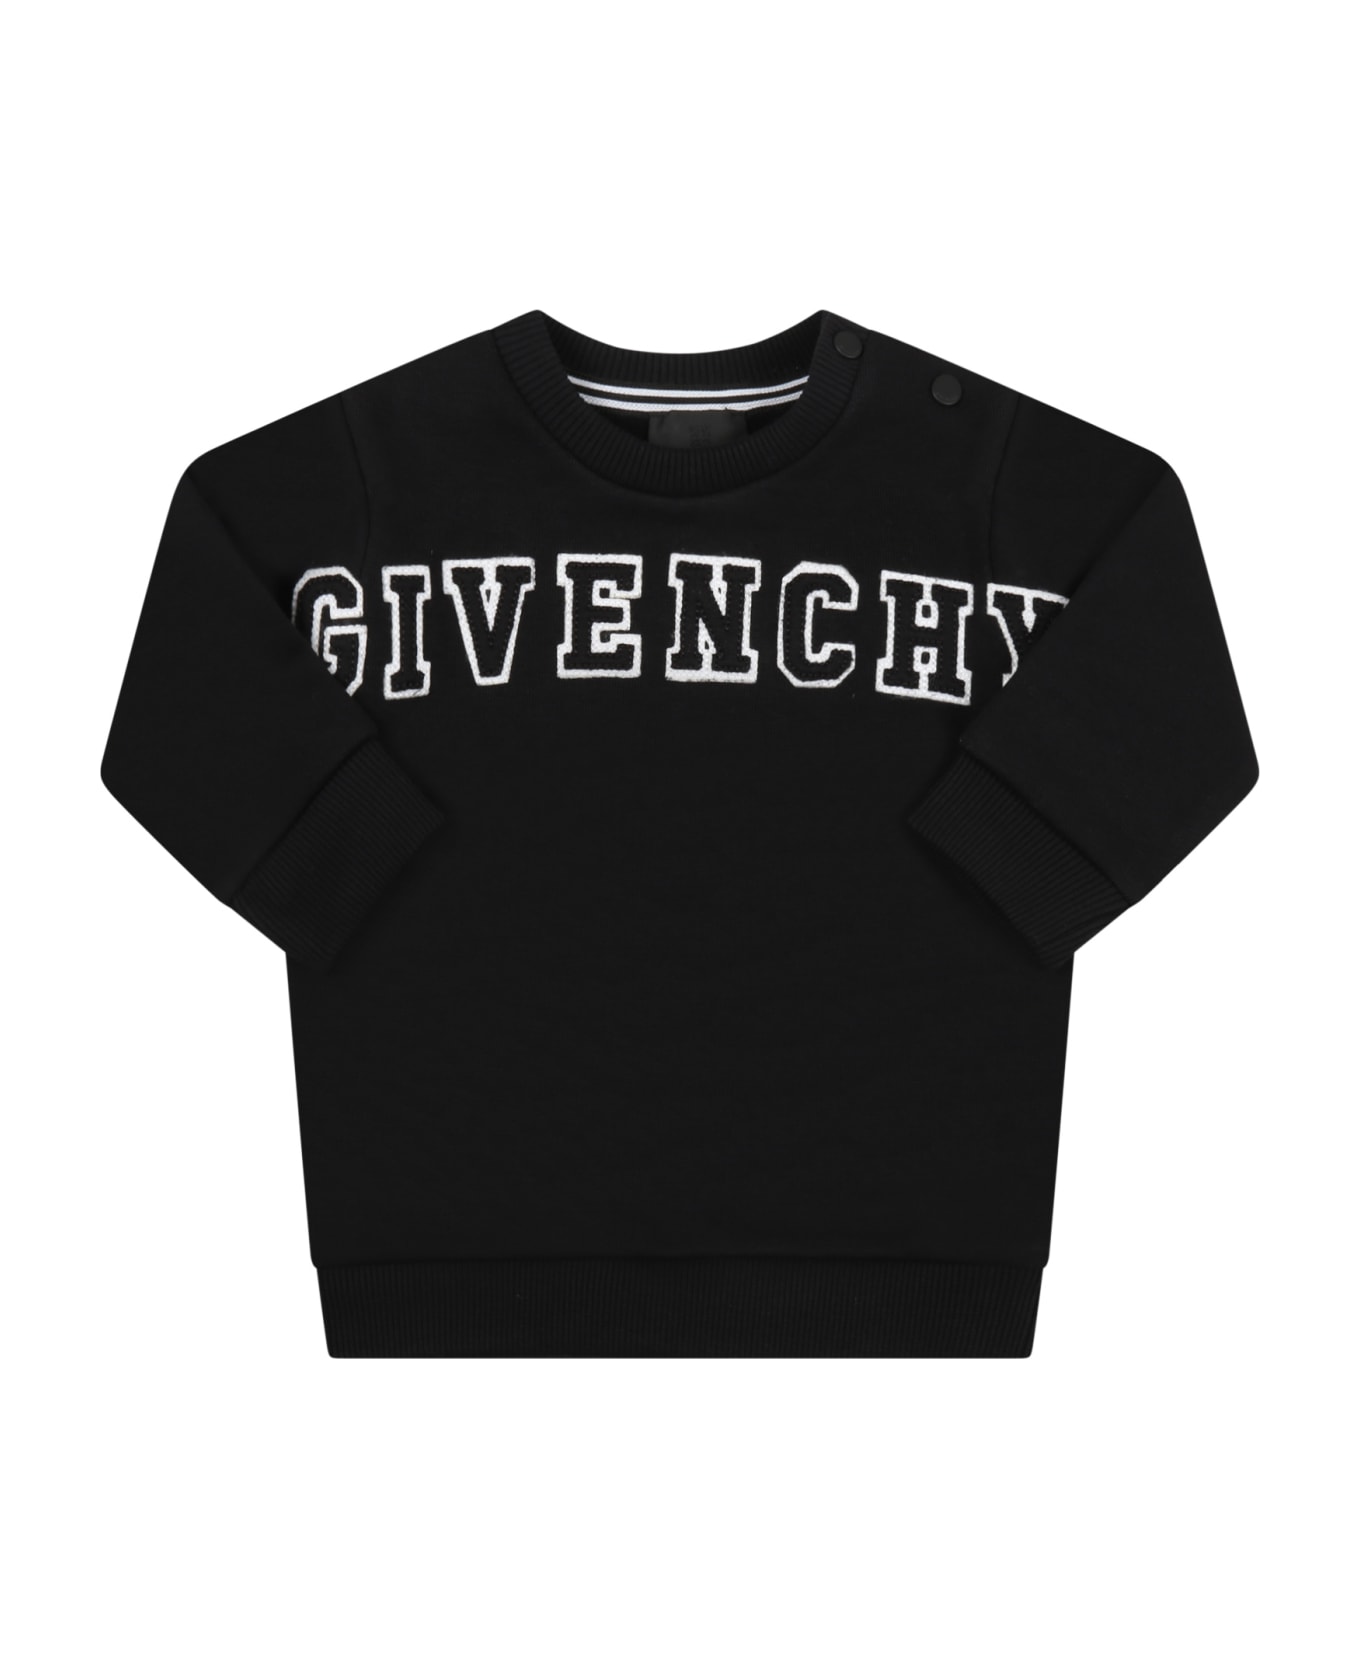 Givenchy Black Sweatshirt For Baby Kids With Logo - Black